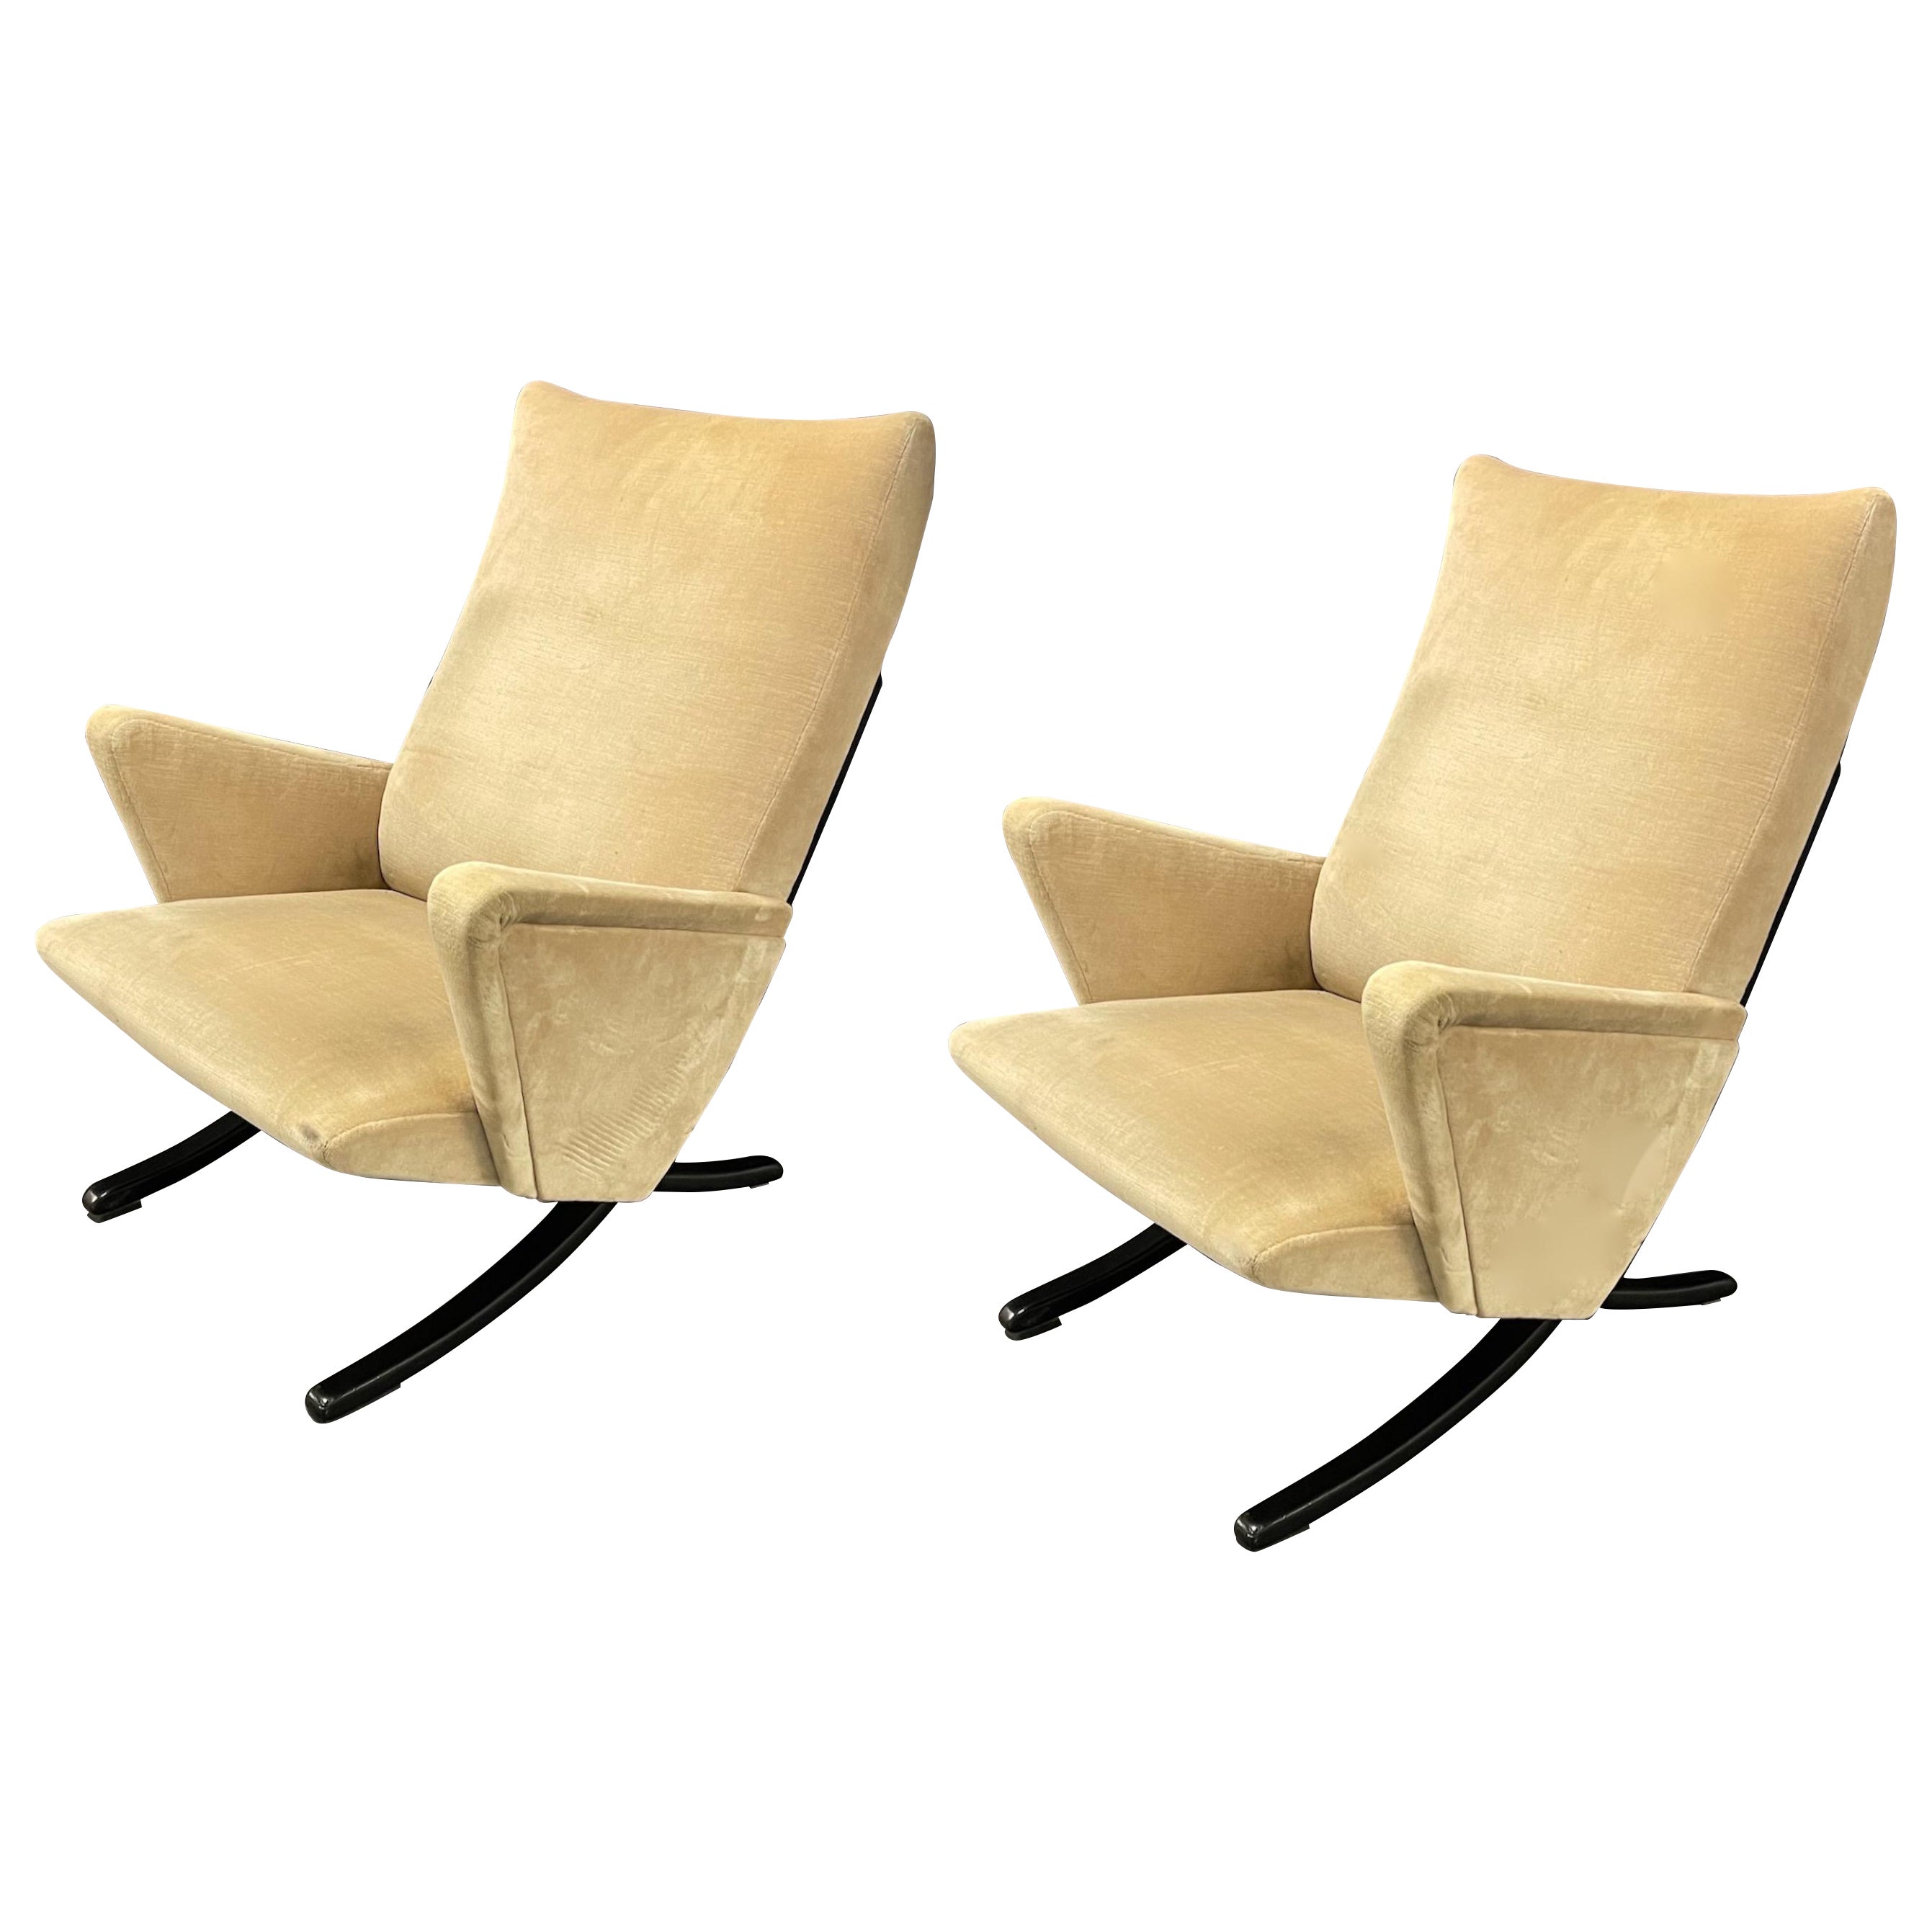 Exceptionally Rare Set of 2 Lounge Chairs by Arnold Bode